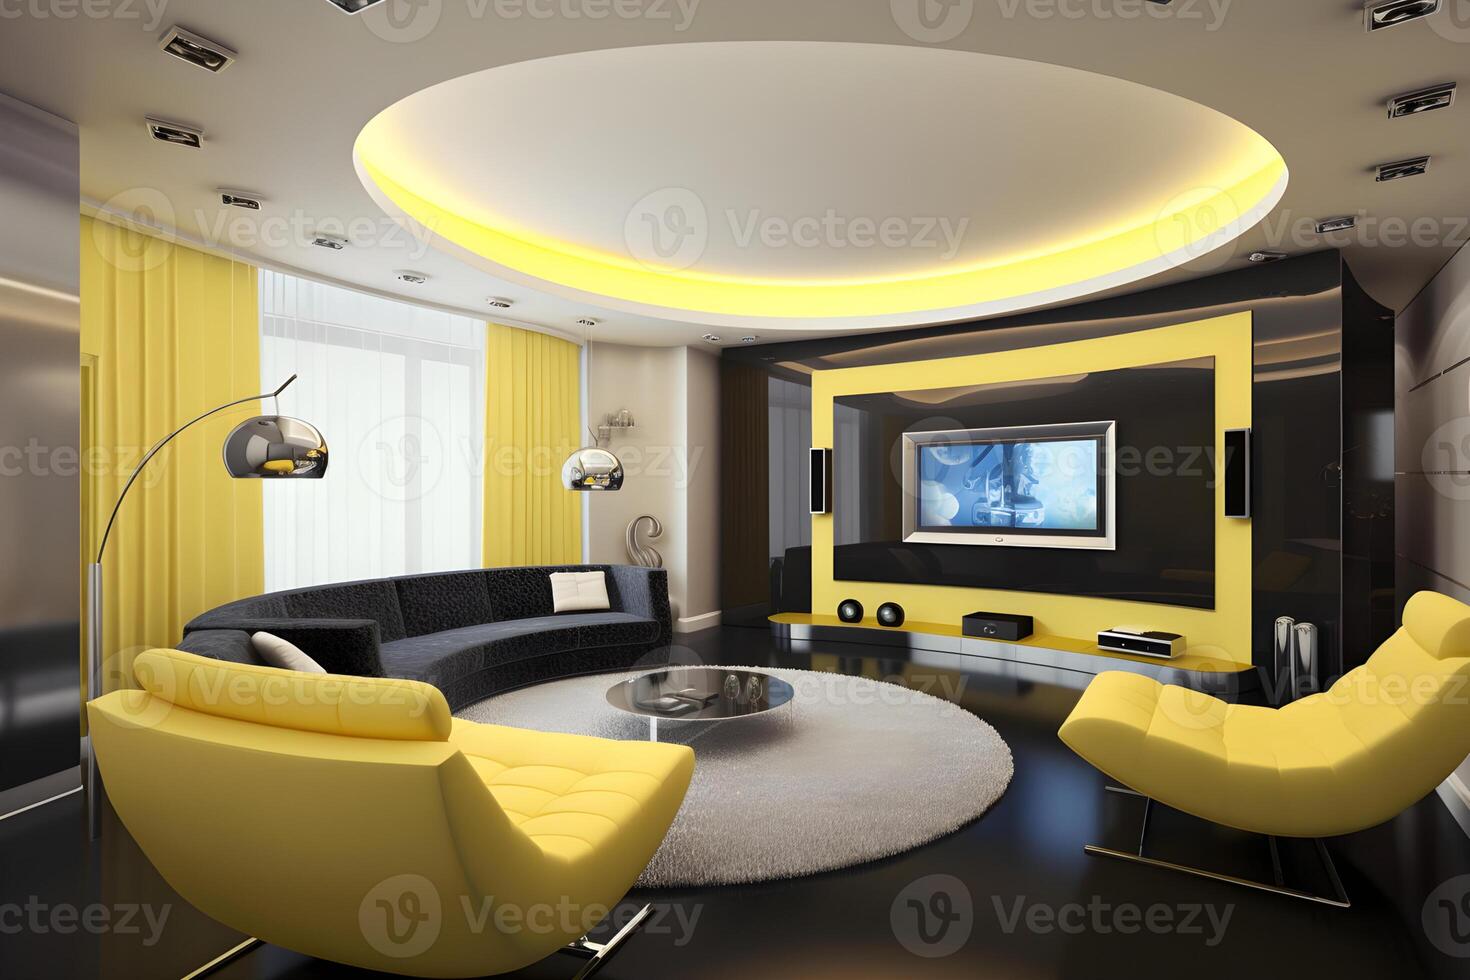 Modern hightech classical interior design living room in yellow tones and color photo